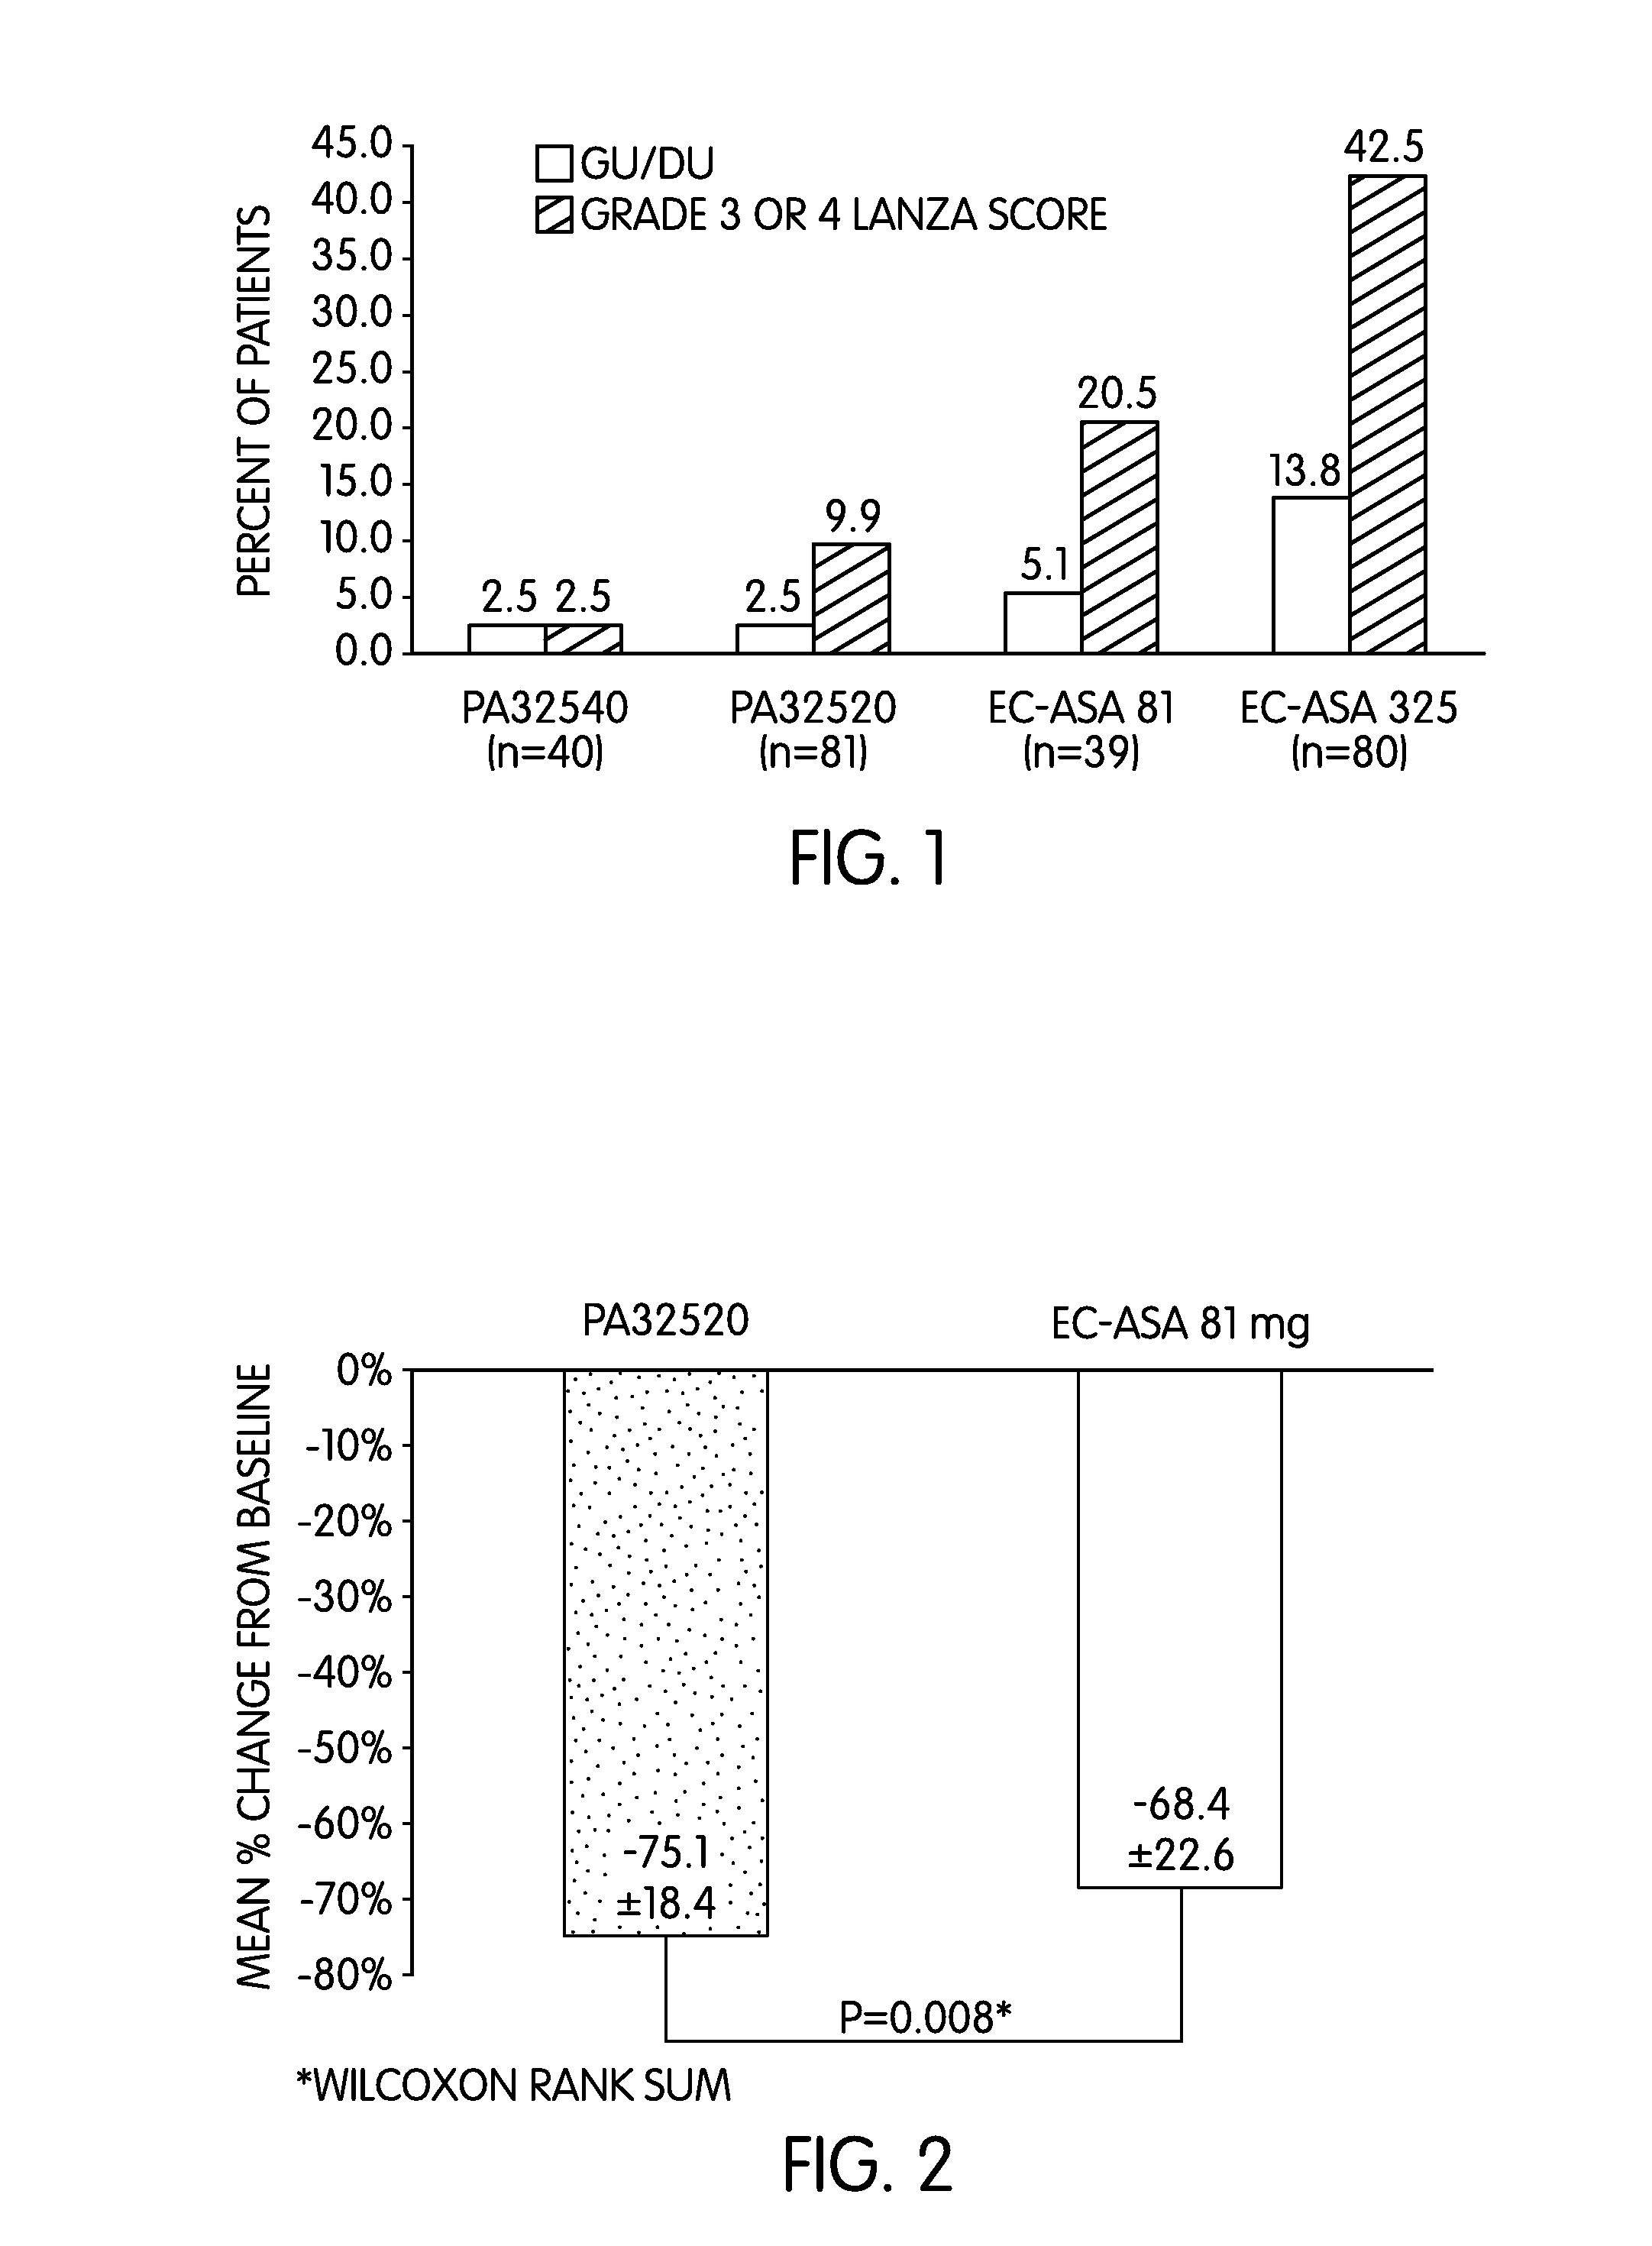 Method for Treating a Patient in Need of Aspirin Therapy